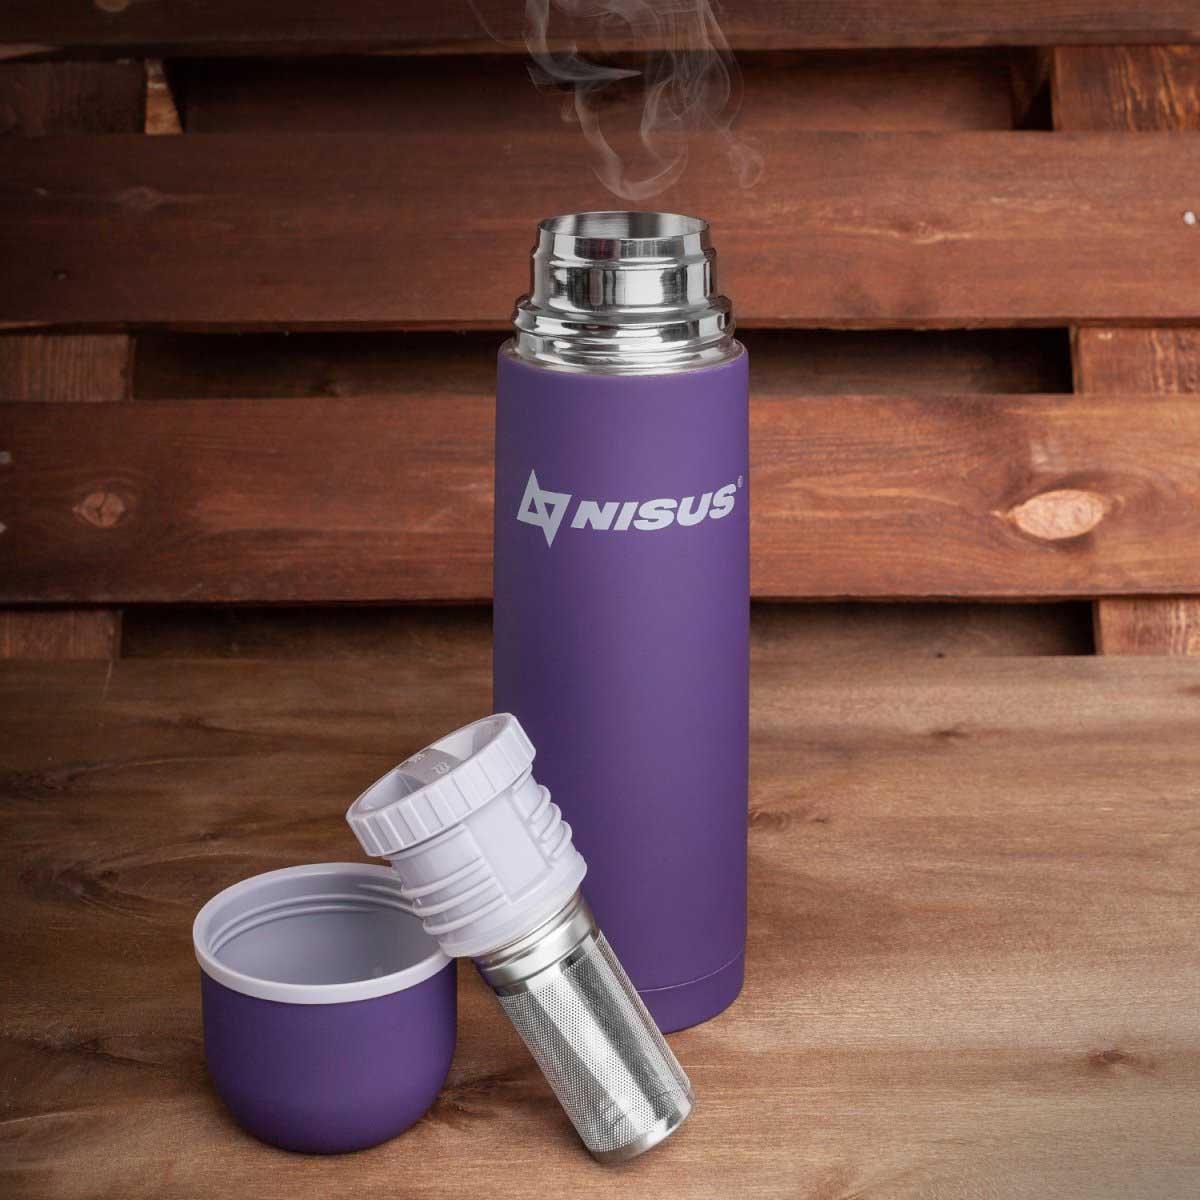 Portable Insulated Water Flask with Strainer, Purple, 33 oz with hot drink inside is standing on the wooden bench